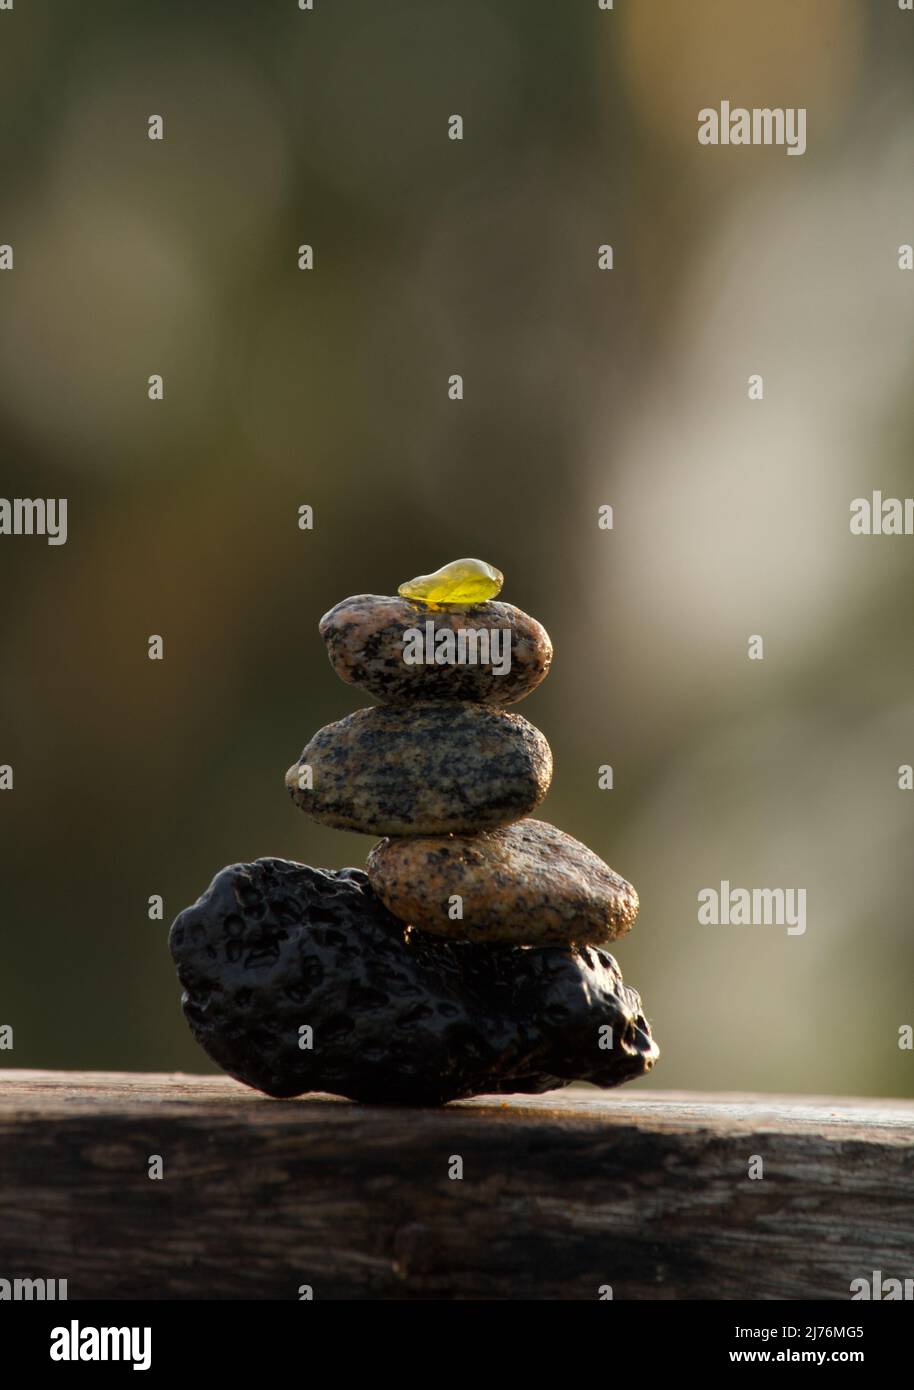 Different types of stone pebbles and tiny sea glass balance on a lava stone Stock Photo